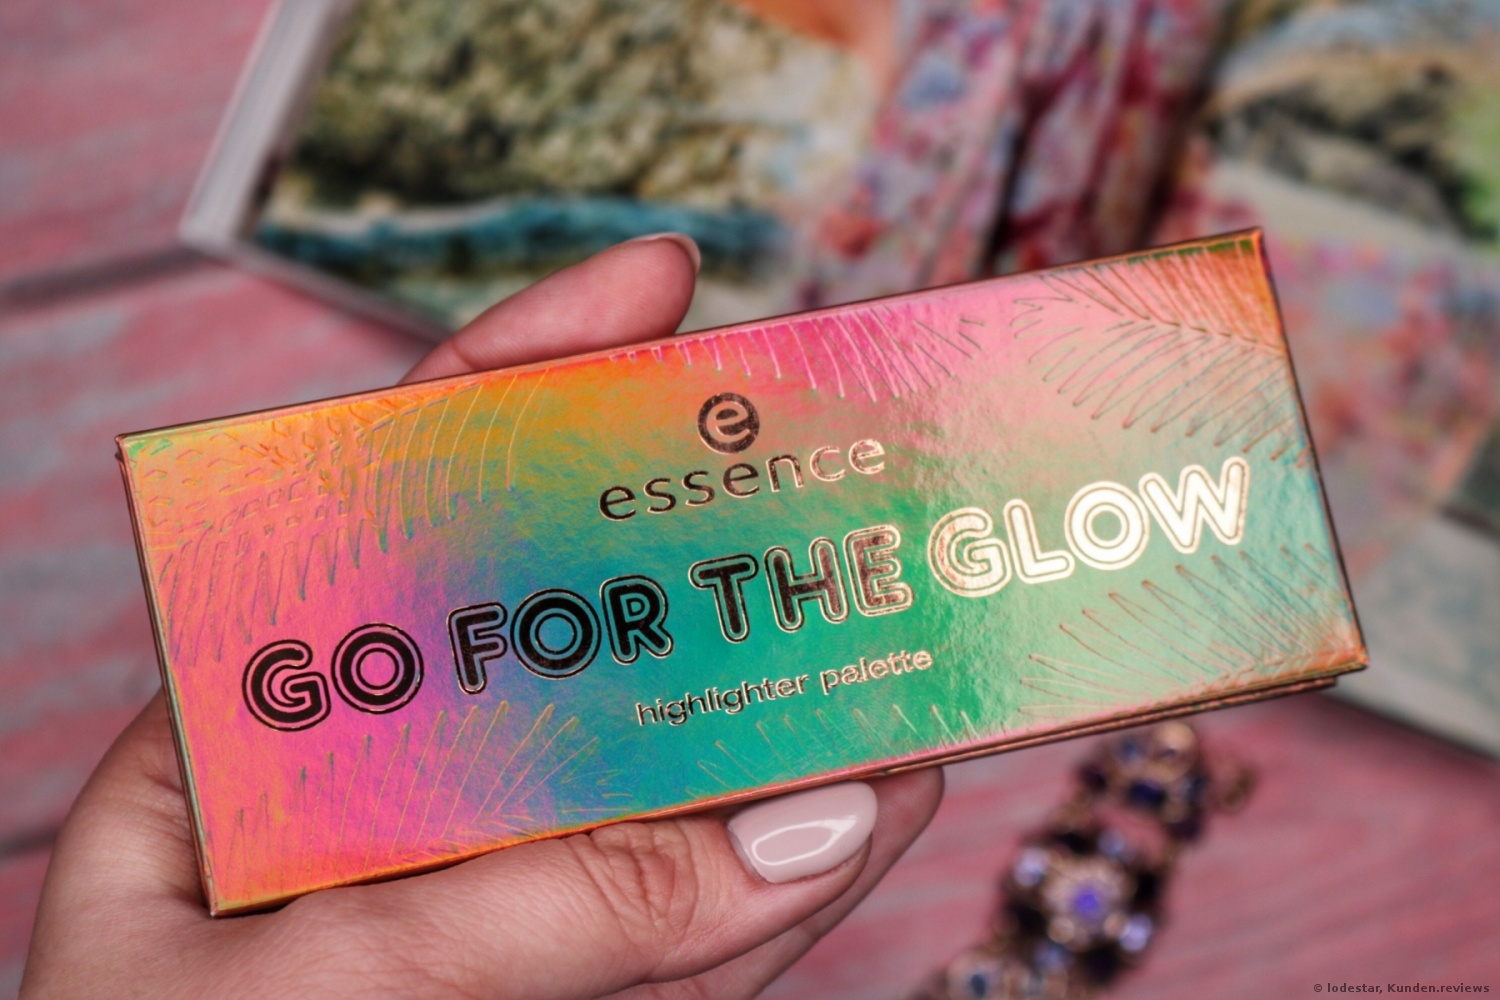  Essence Go for the glow Highlighter Palette 02